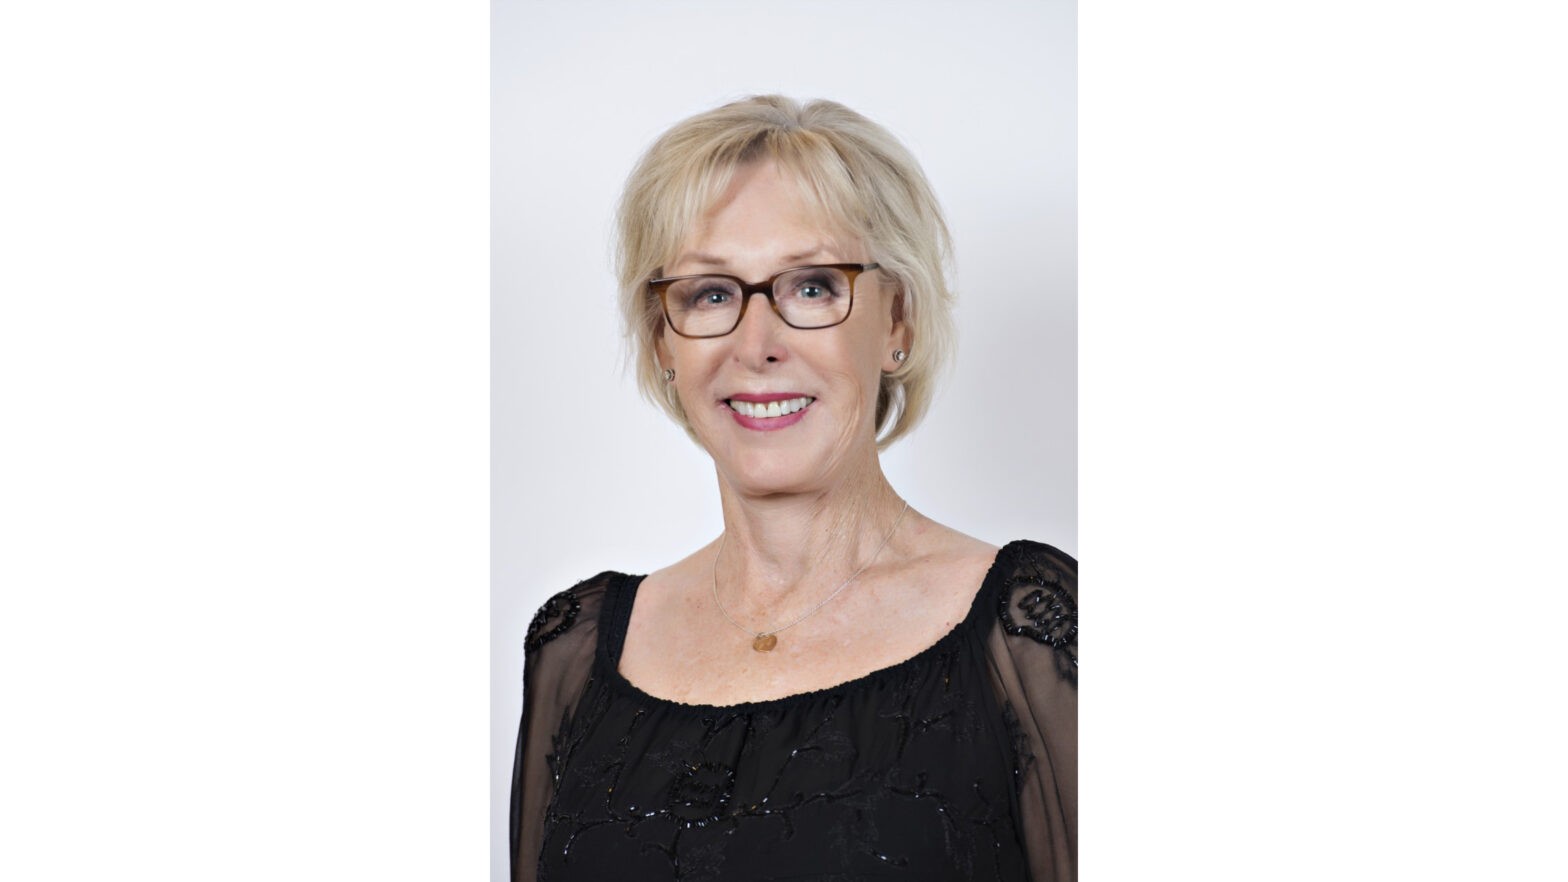 CSUF Entrepreneurship Welcomes Janet Steiner as the Newest Member of its Advisory Board!!!